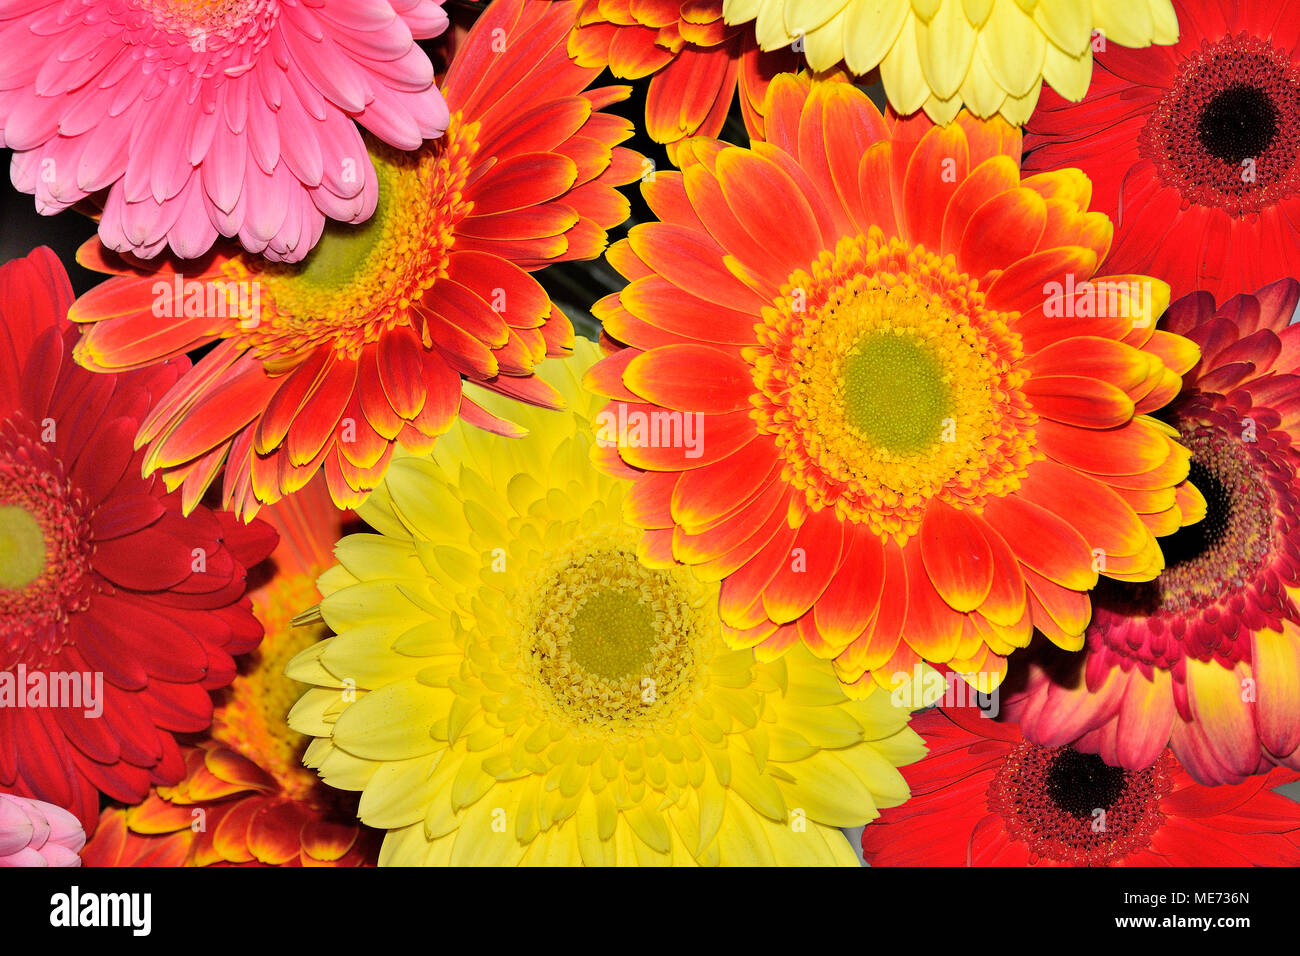 Beautiful floral background of different colorful gerberas close up. Concept of festive bright and joyful design for any holiday or event Stock Photo